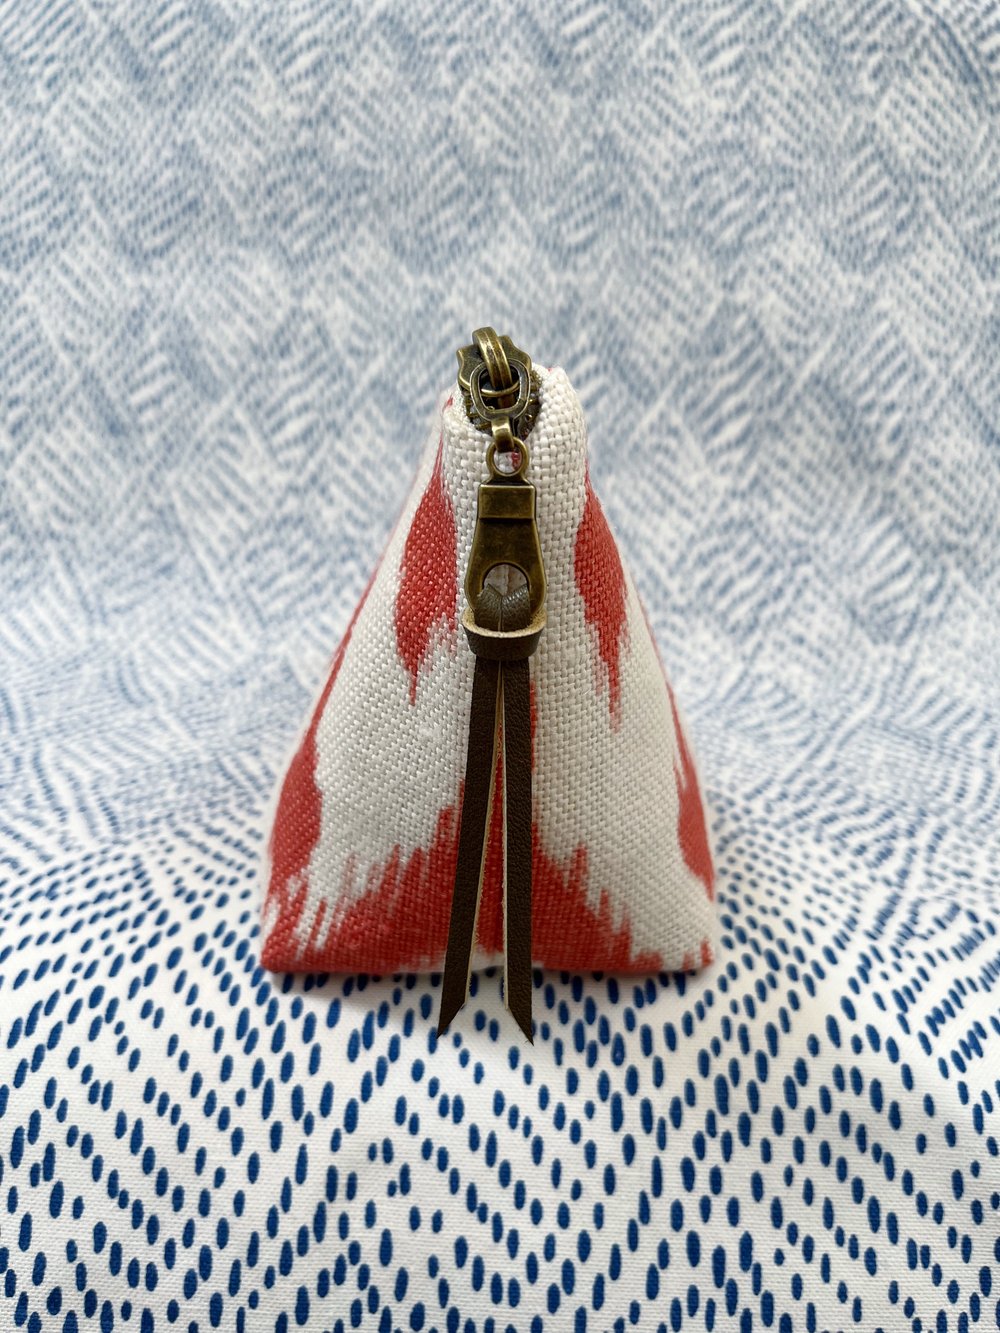 Image of Ikat Pouch